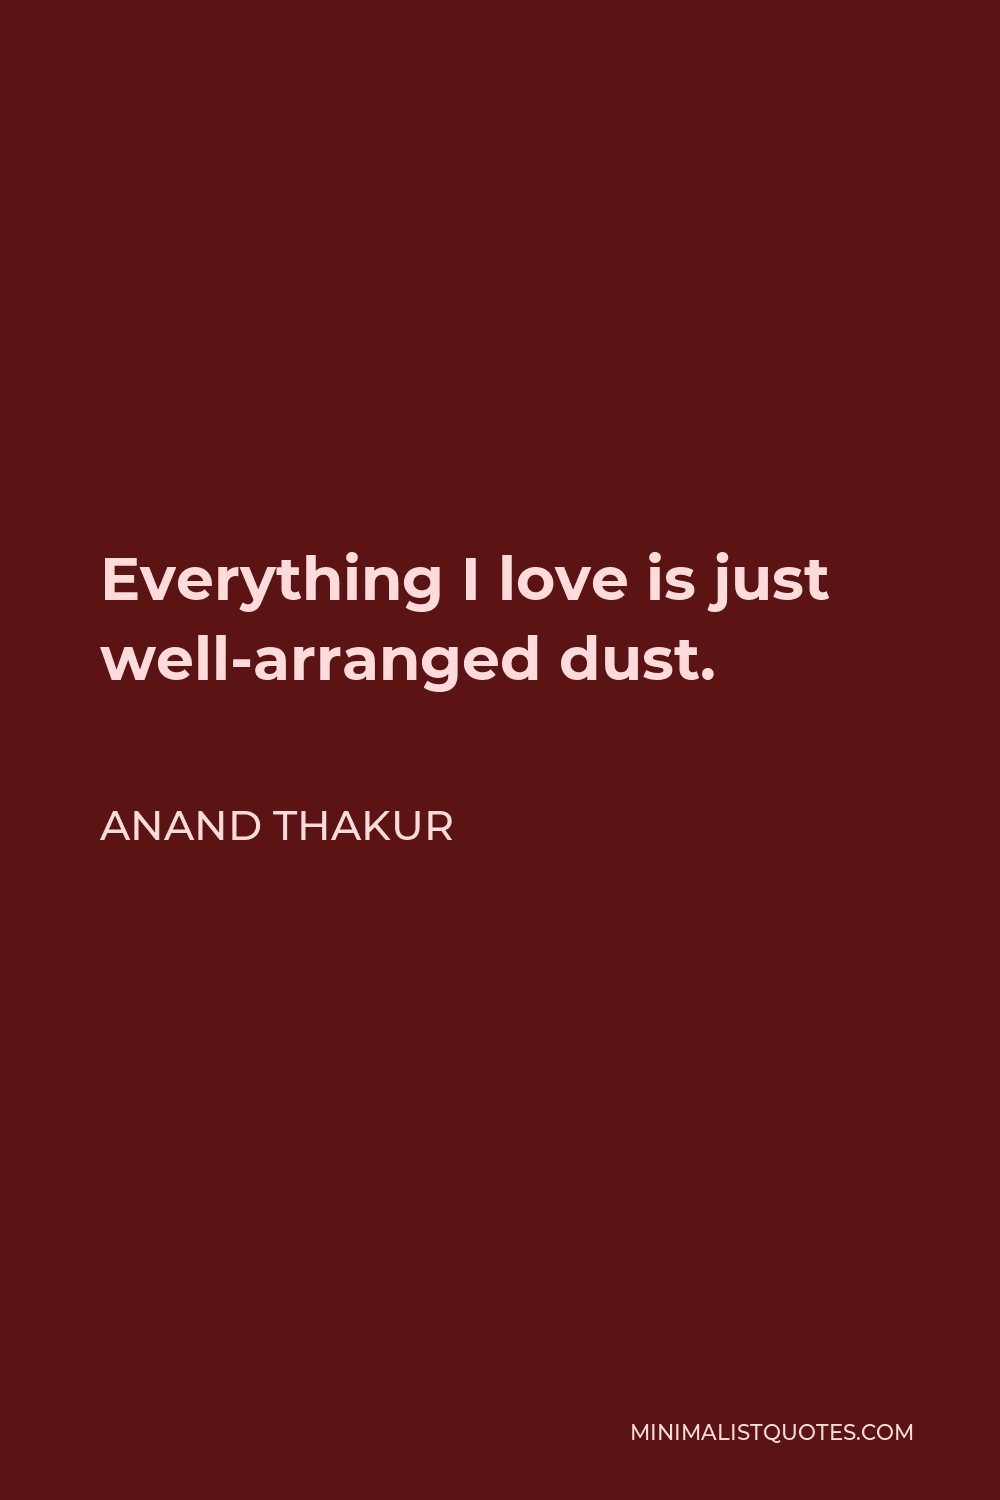 Anand Thakur Quote - Everything I love is just well-arranged dust.